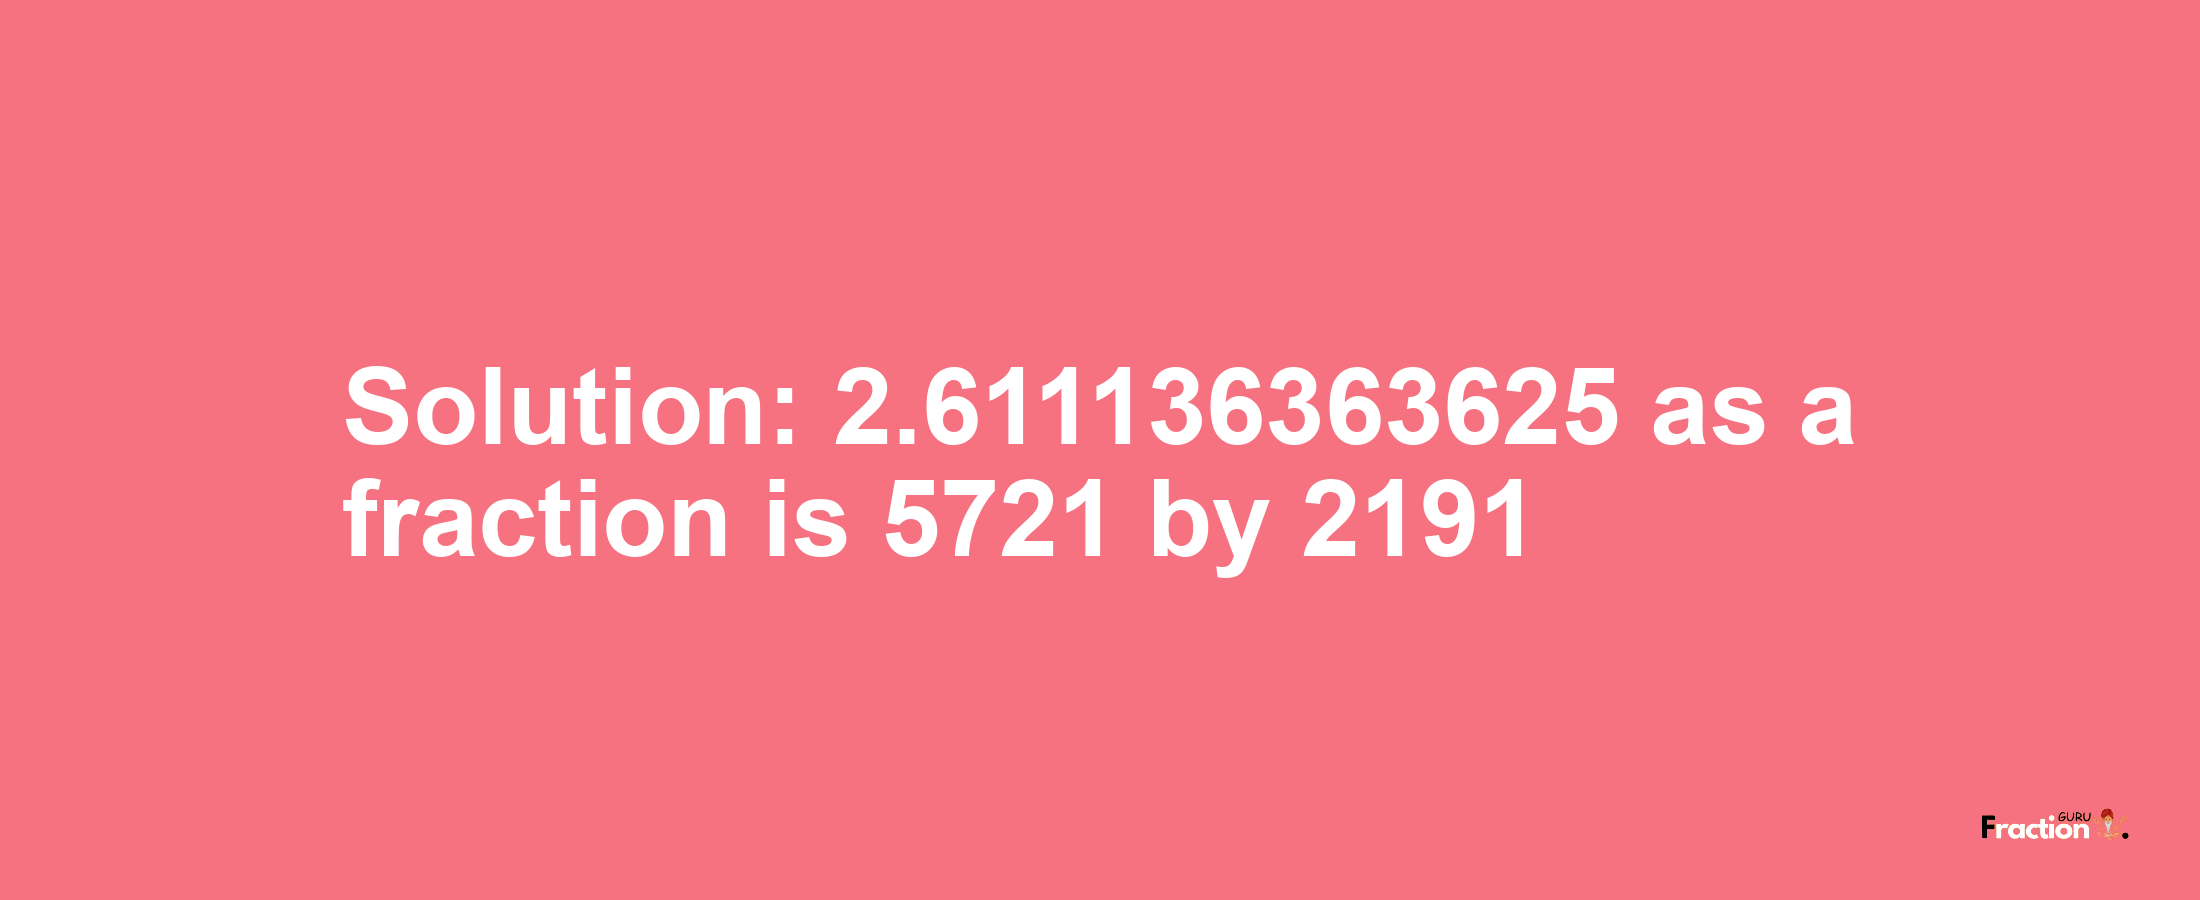 Solution:2.611136363625 as a fraction is 5721/2191